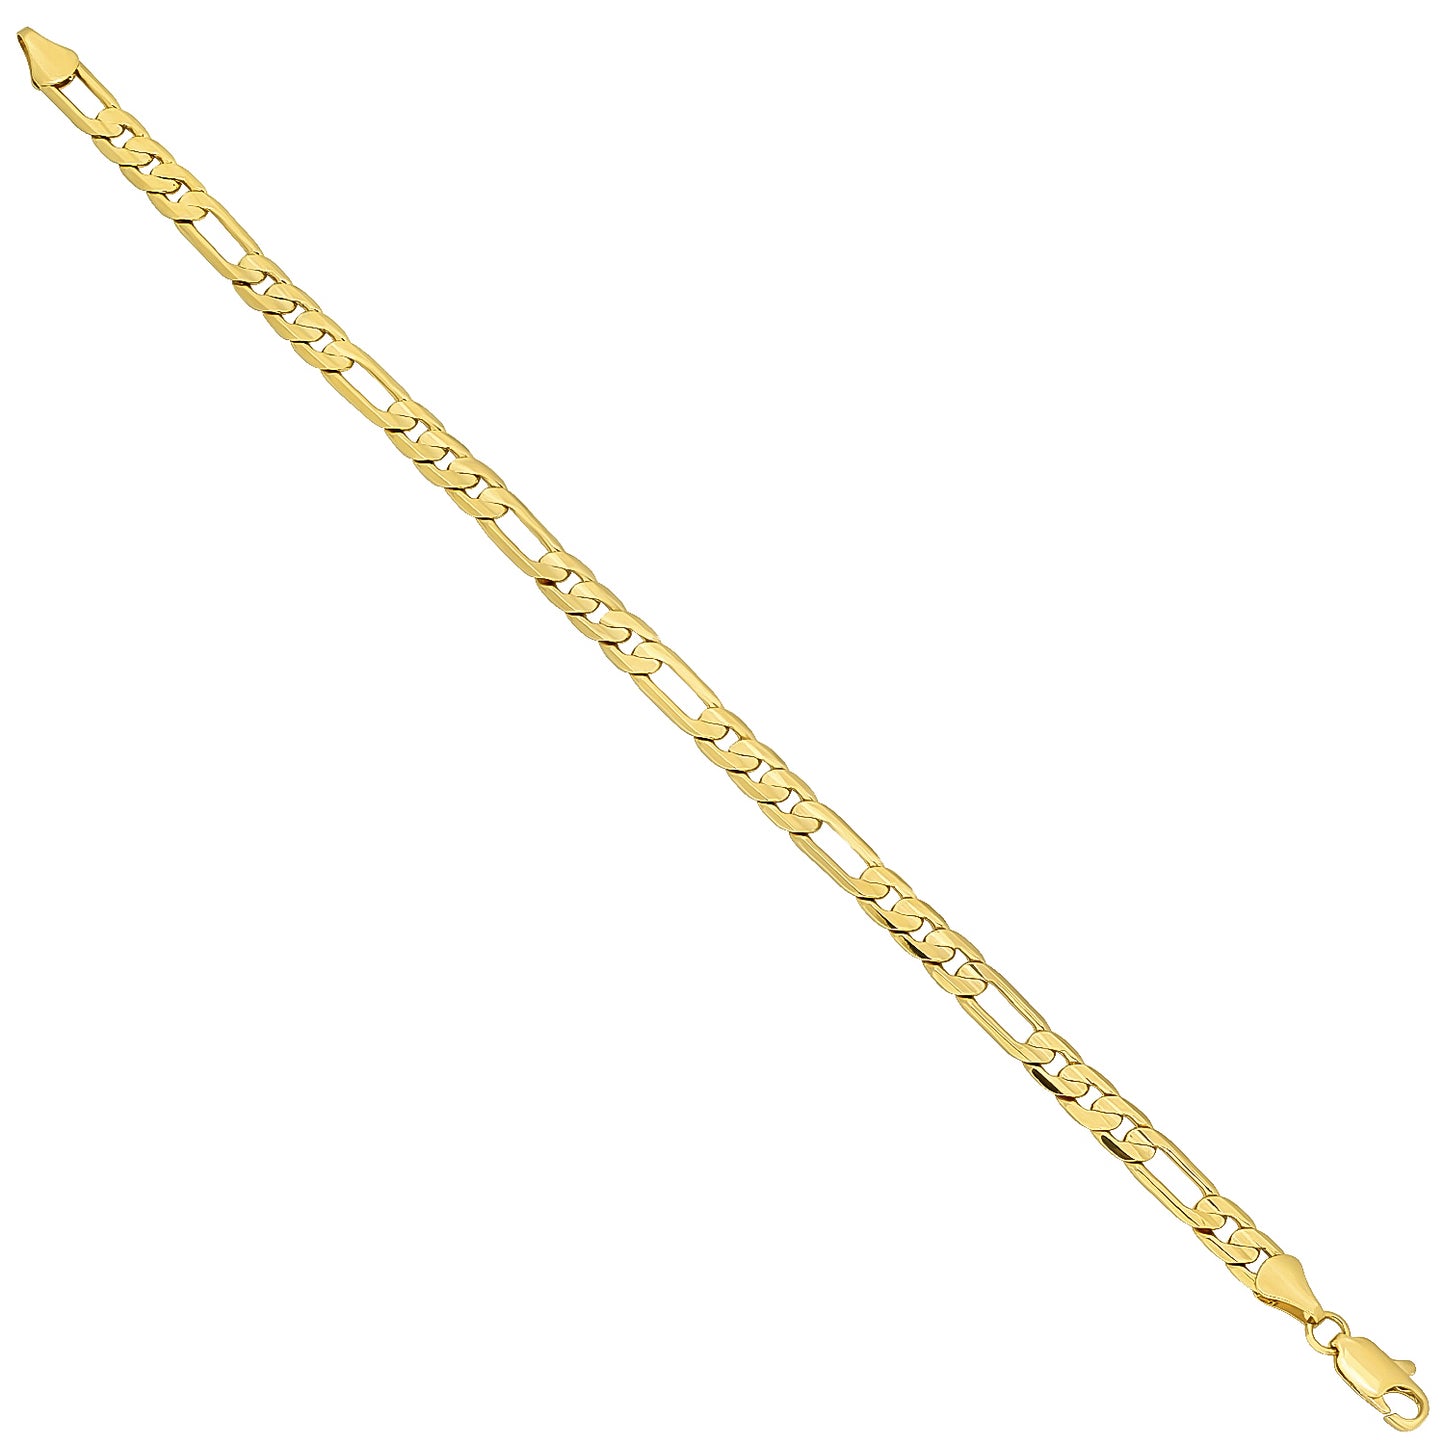 Women's 4mm-6mm Polished 14k Yellow Gold Plated Flat Figaro Chain Anklet (SKU: GL-FIGARO-CONCAVE-AK)